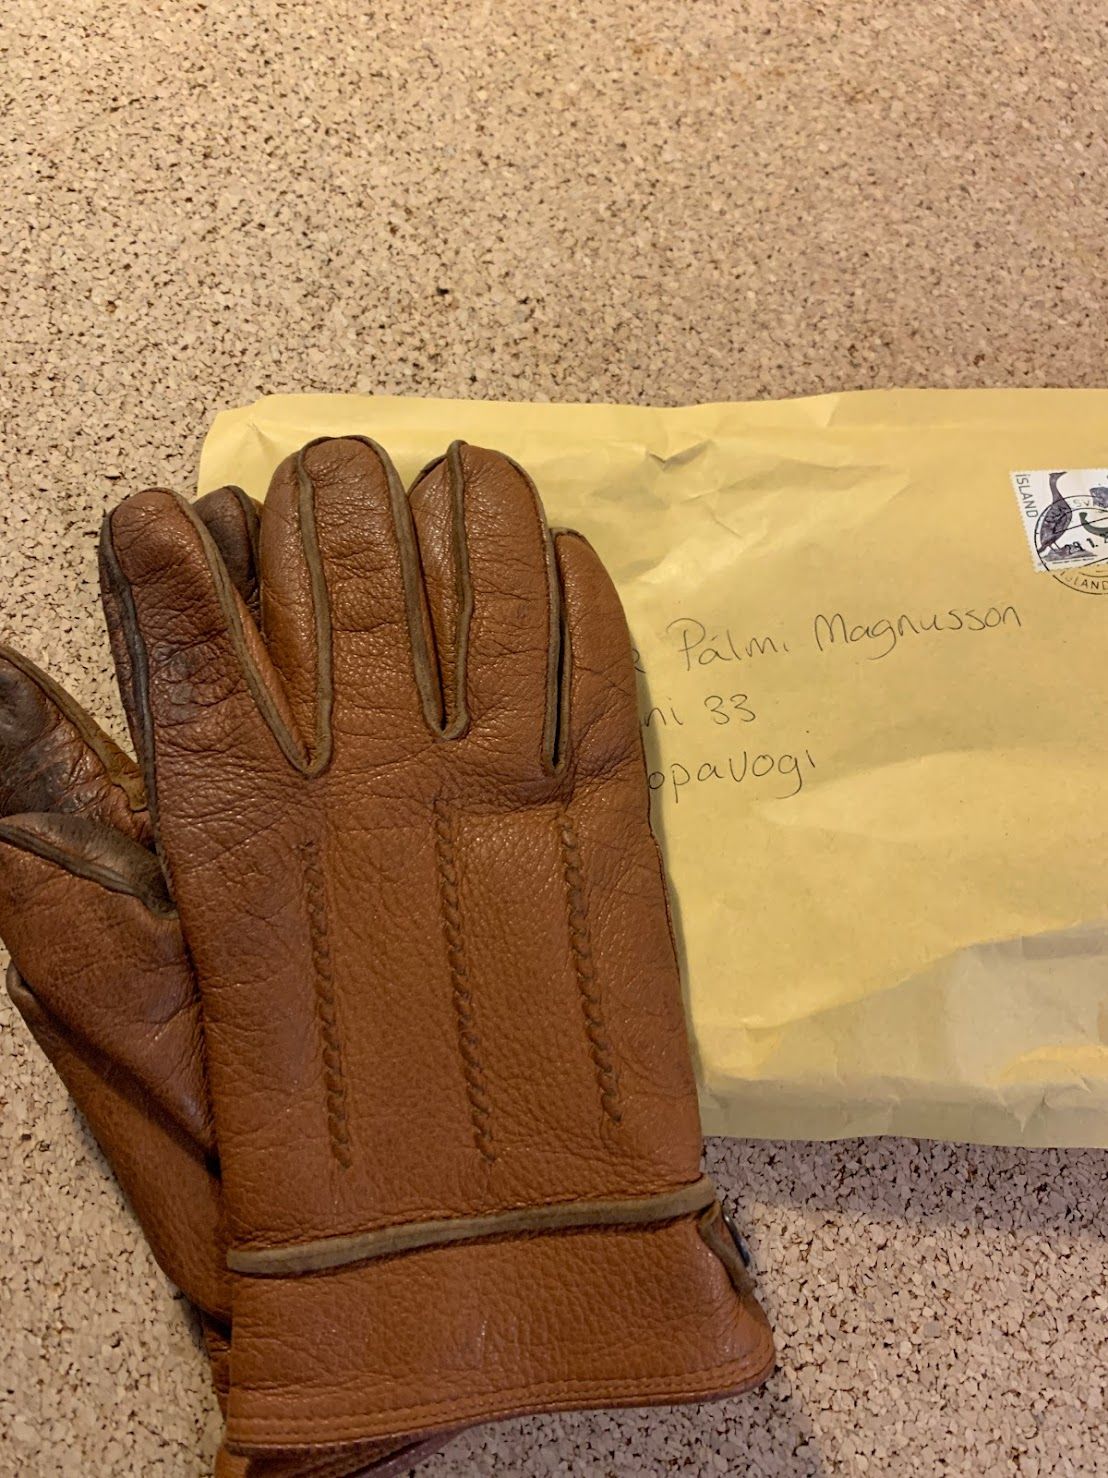 My Timberland gloves mailed back